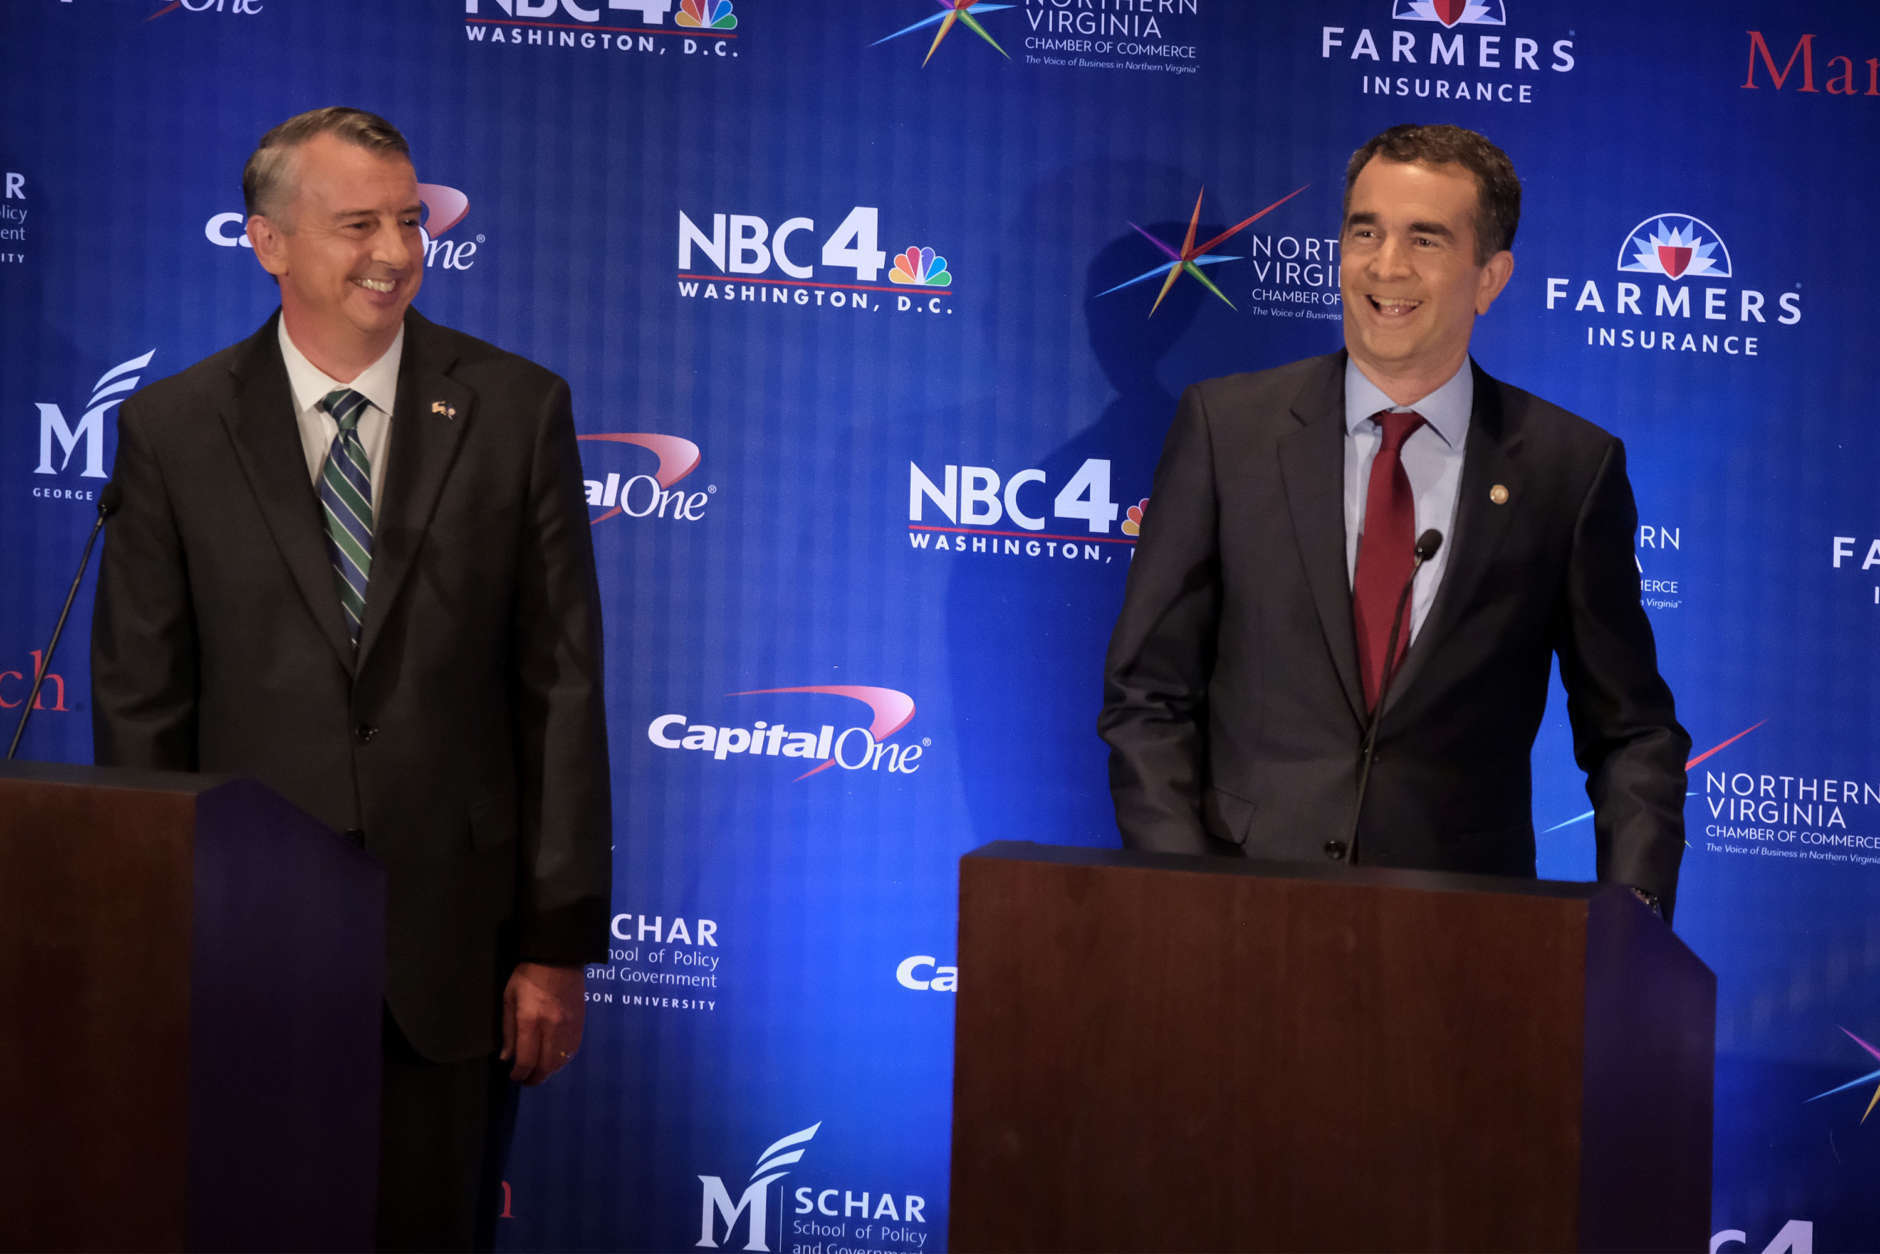 Ed Gillespie and Lt. Gov. Ralph Northam stand together prior to their second debate in McLean, Virginia on Sept. 19, 2017. (Pool Photo by Bonnie Jo Mount/The Washington Post)